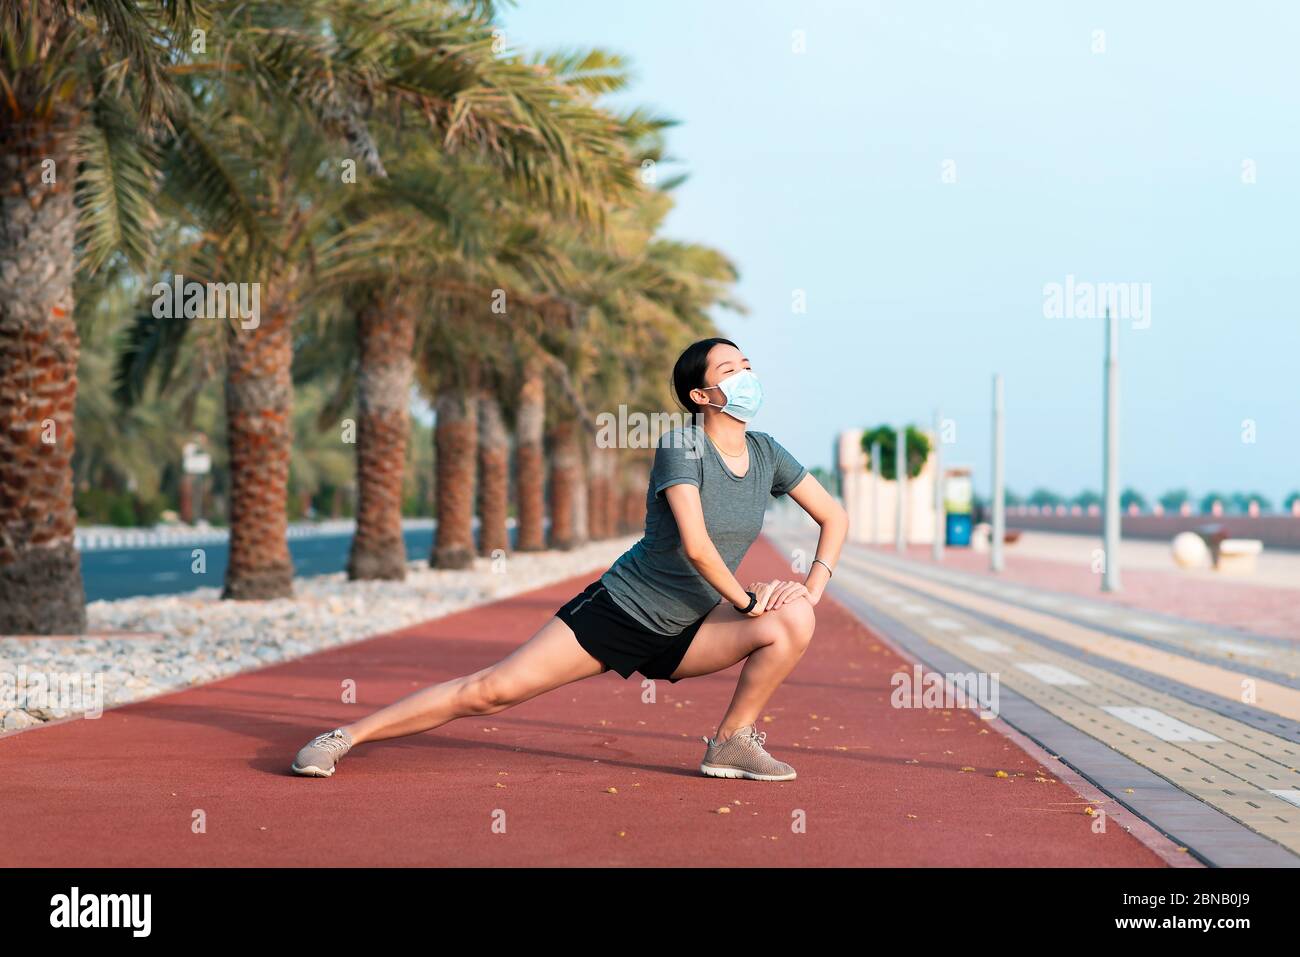 Asian woman exercising and stretching while wearing protective surgical mask to warm up before fitness workout outdoors Stock Photo